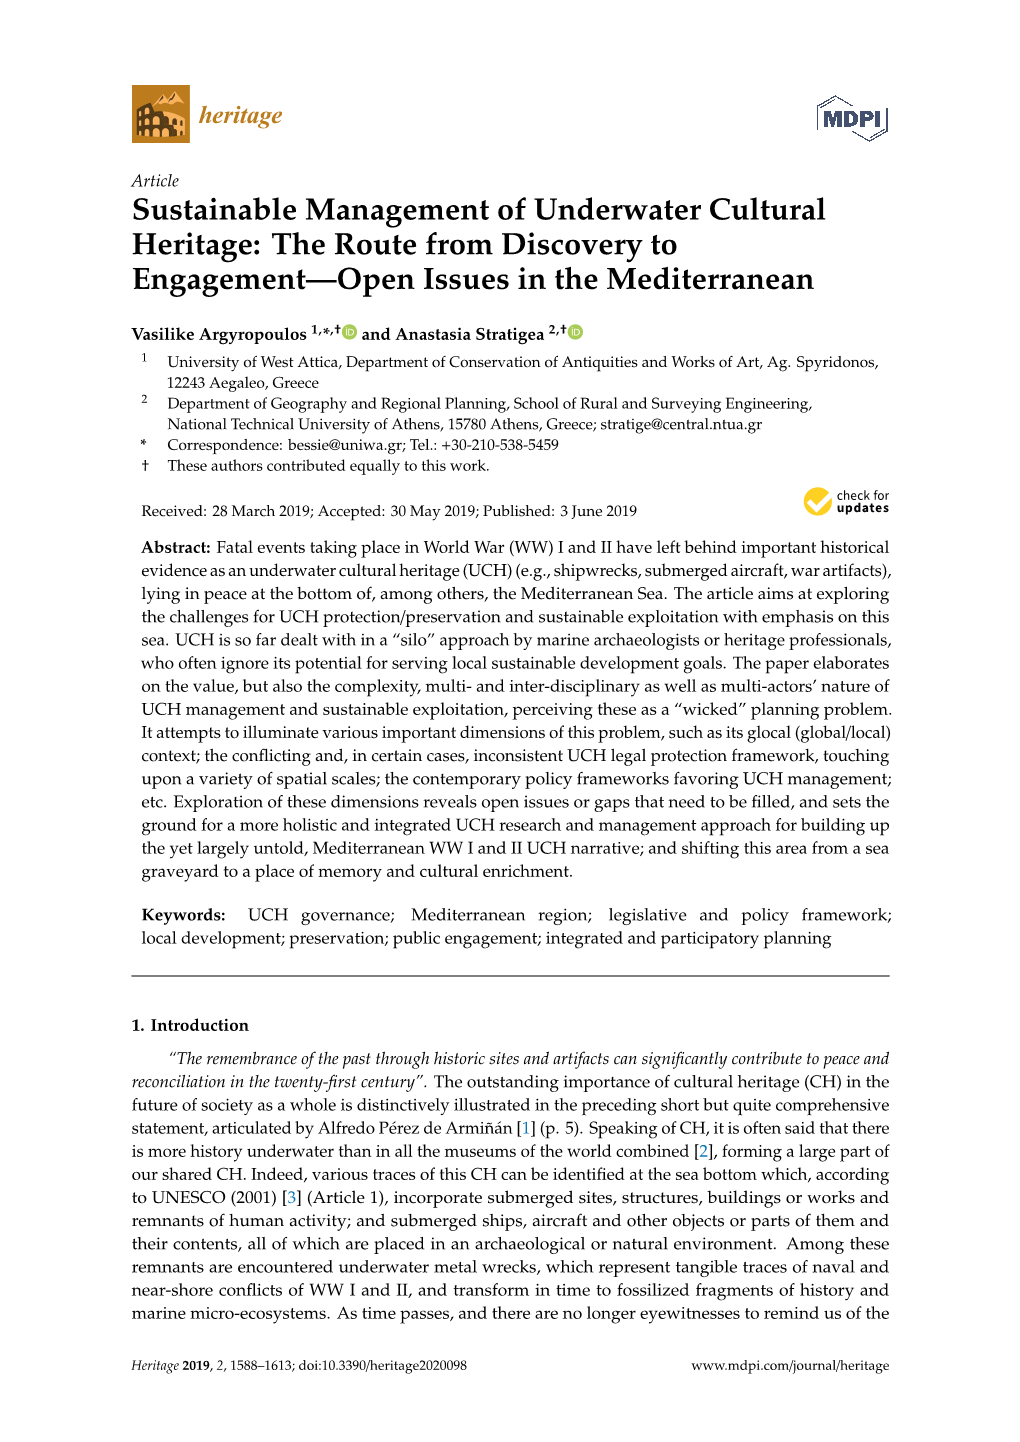 Sustainable Management of Underwater Cultural Heritage: the Route from Discovery to Engagement—Open Issues in the Mediterranean